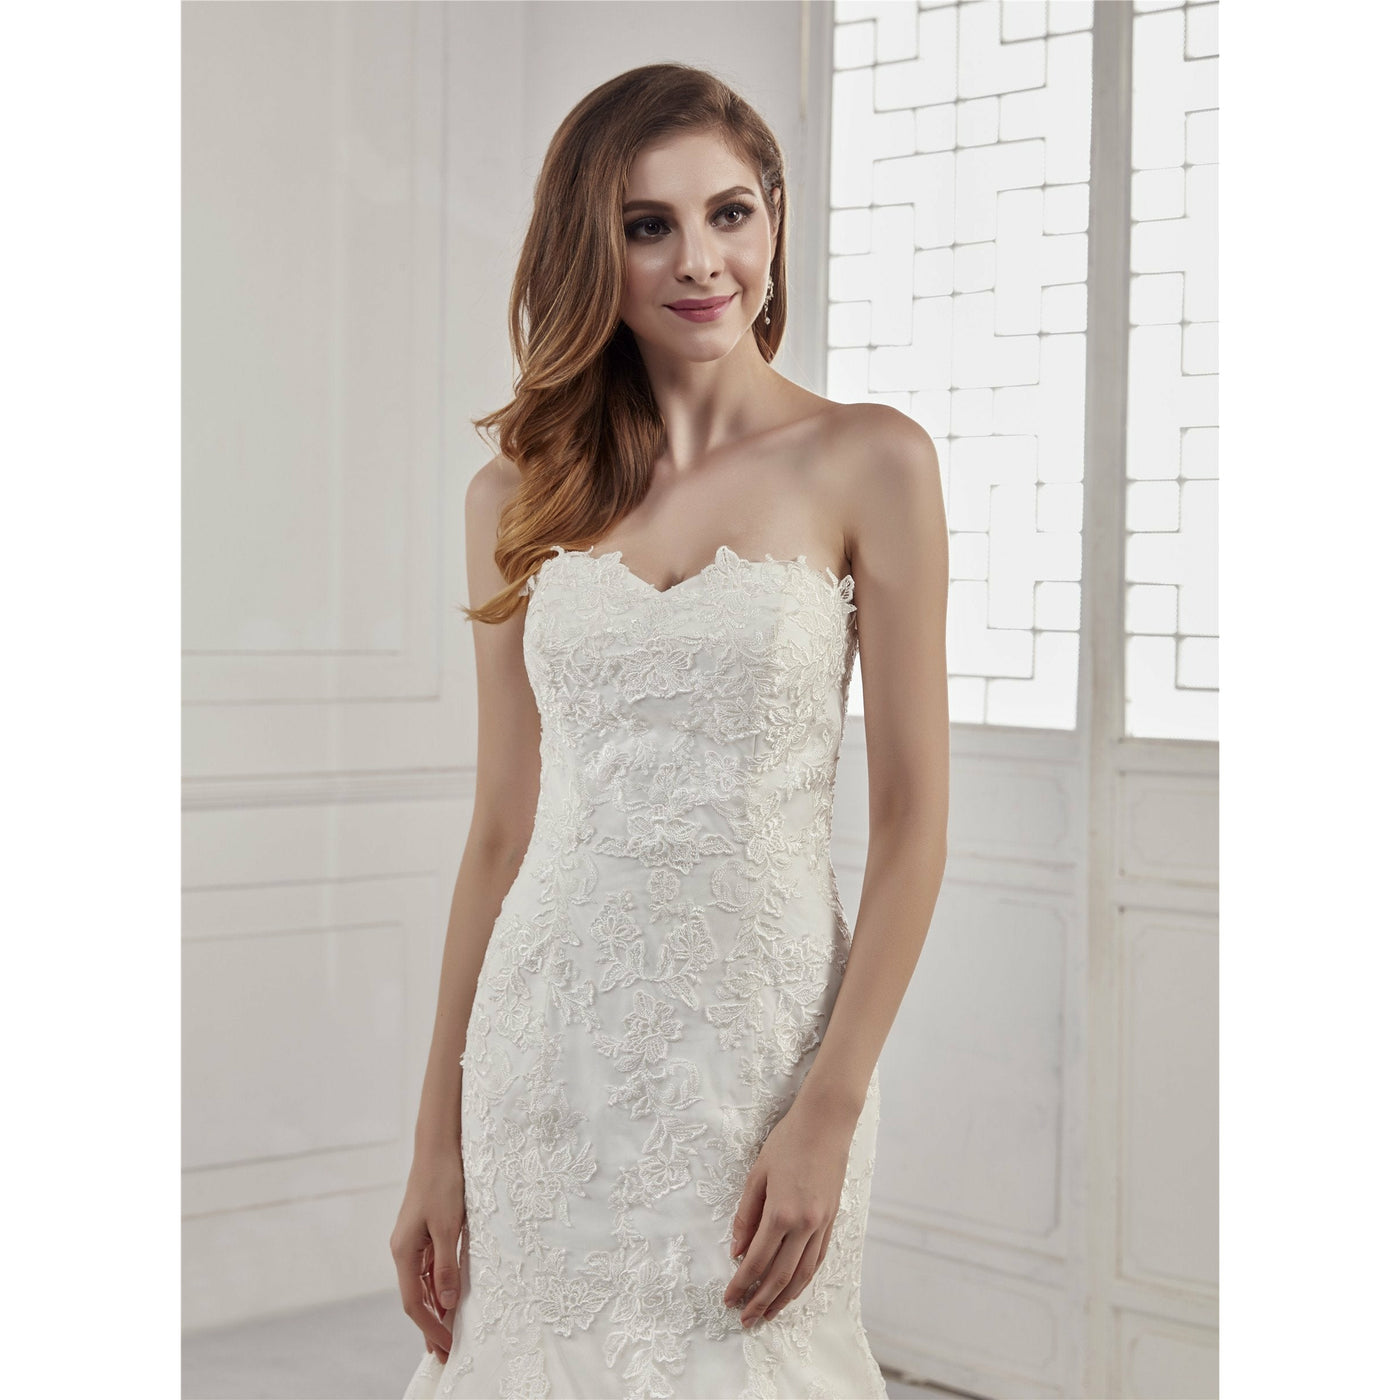 Chicely sweetheart floral applique mermaid wedding dress1